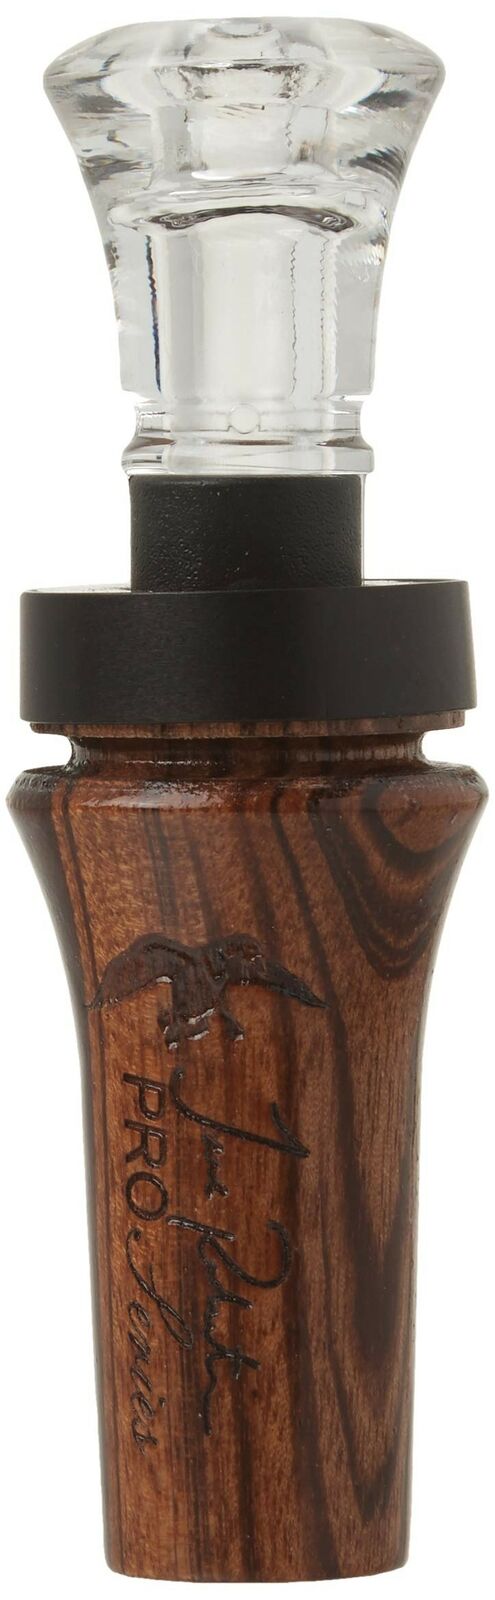 Duck Commander Jase Robertson Pro Series Duck Call | Must Have Hunting Access...